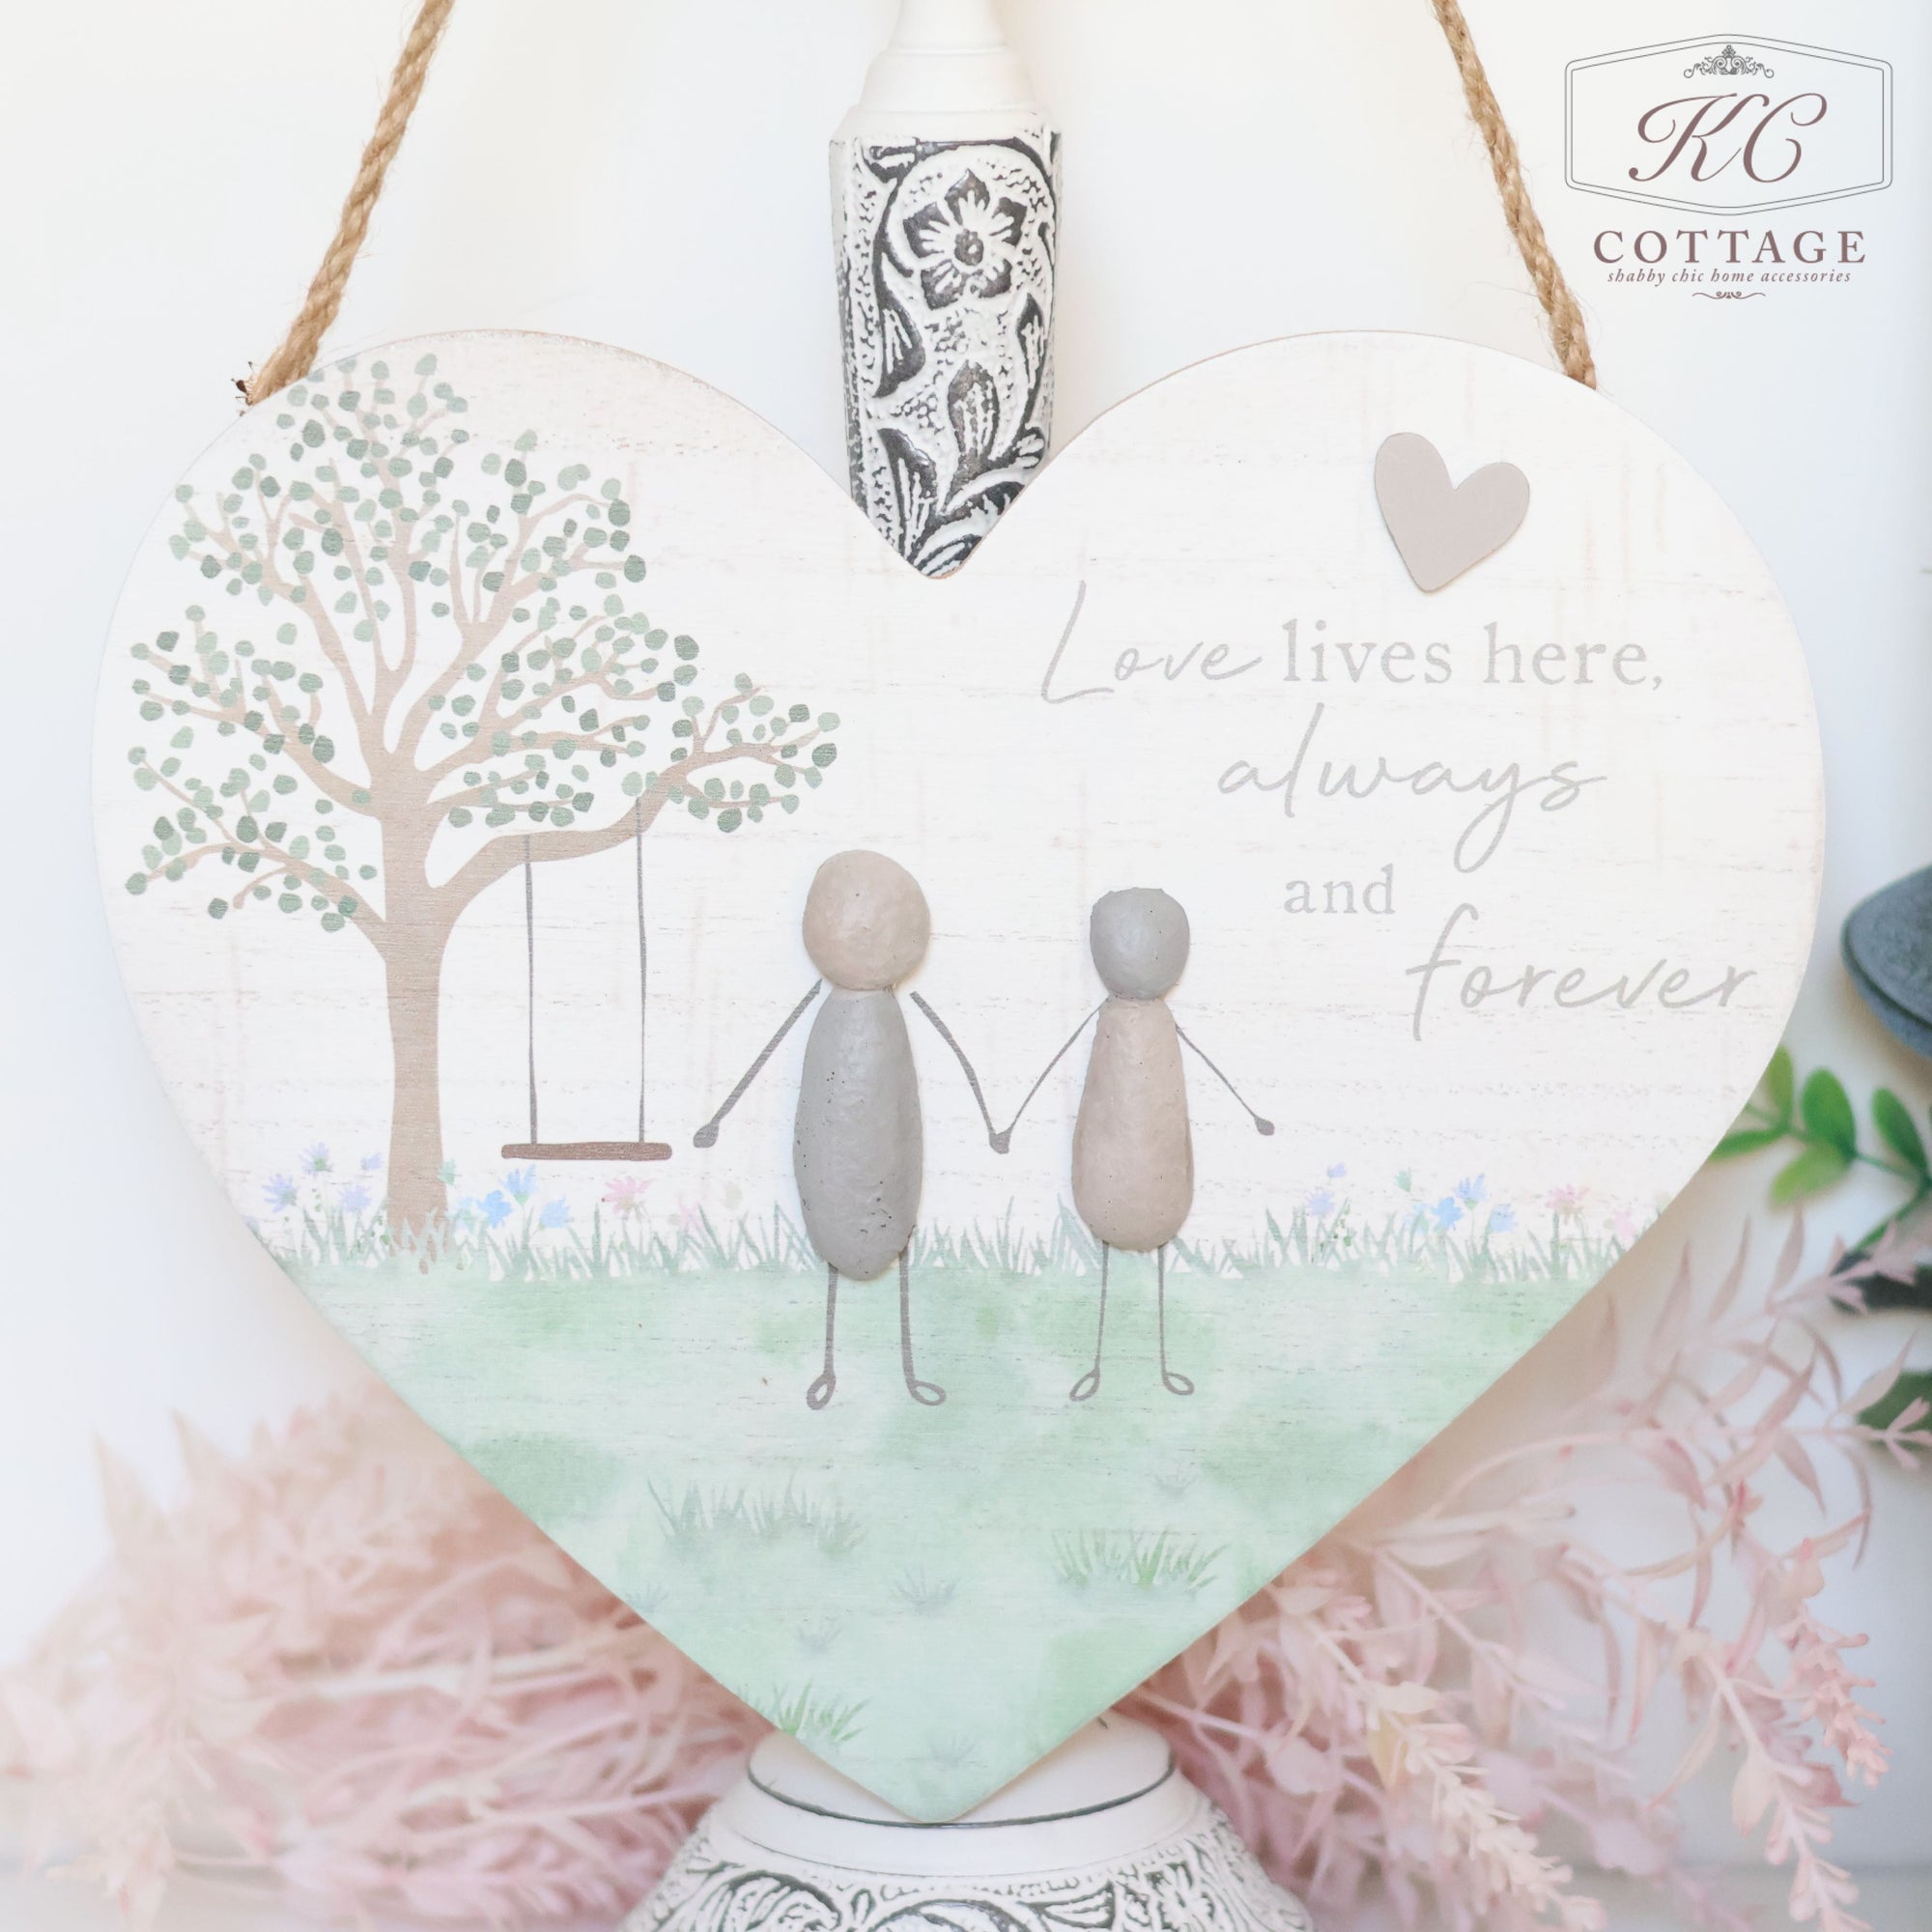 A Pebble Friends & Love Heart Plaque with a painted scene of two pebble figures holding hands under a tree with a swing. The background features soft pastel greenery and flowers. Sentimental quotes read, "Love lives here, always and forever." This charming piece of home decor is hung by a rope.